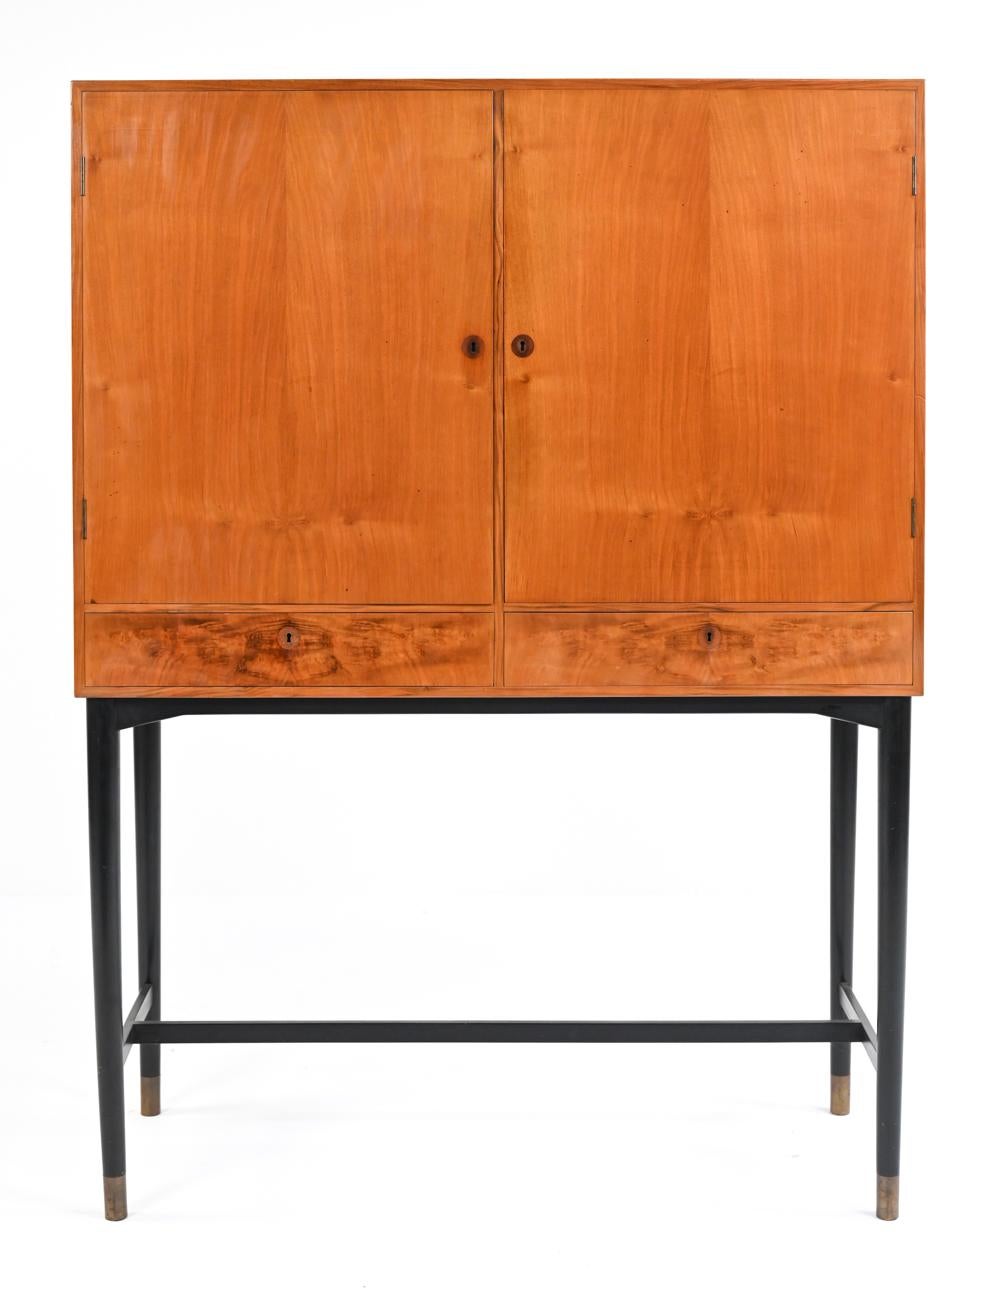 Fine craftsmanship and luxurious details abound in this exquisite tall server cabinet. Two bookmatched mahogany doors open to reveal ample shelving and an easily adjustable modular tray system for flatware storage. Each tray is felt lined, with